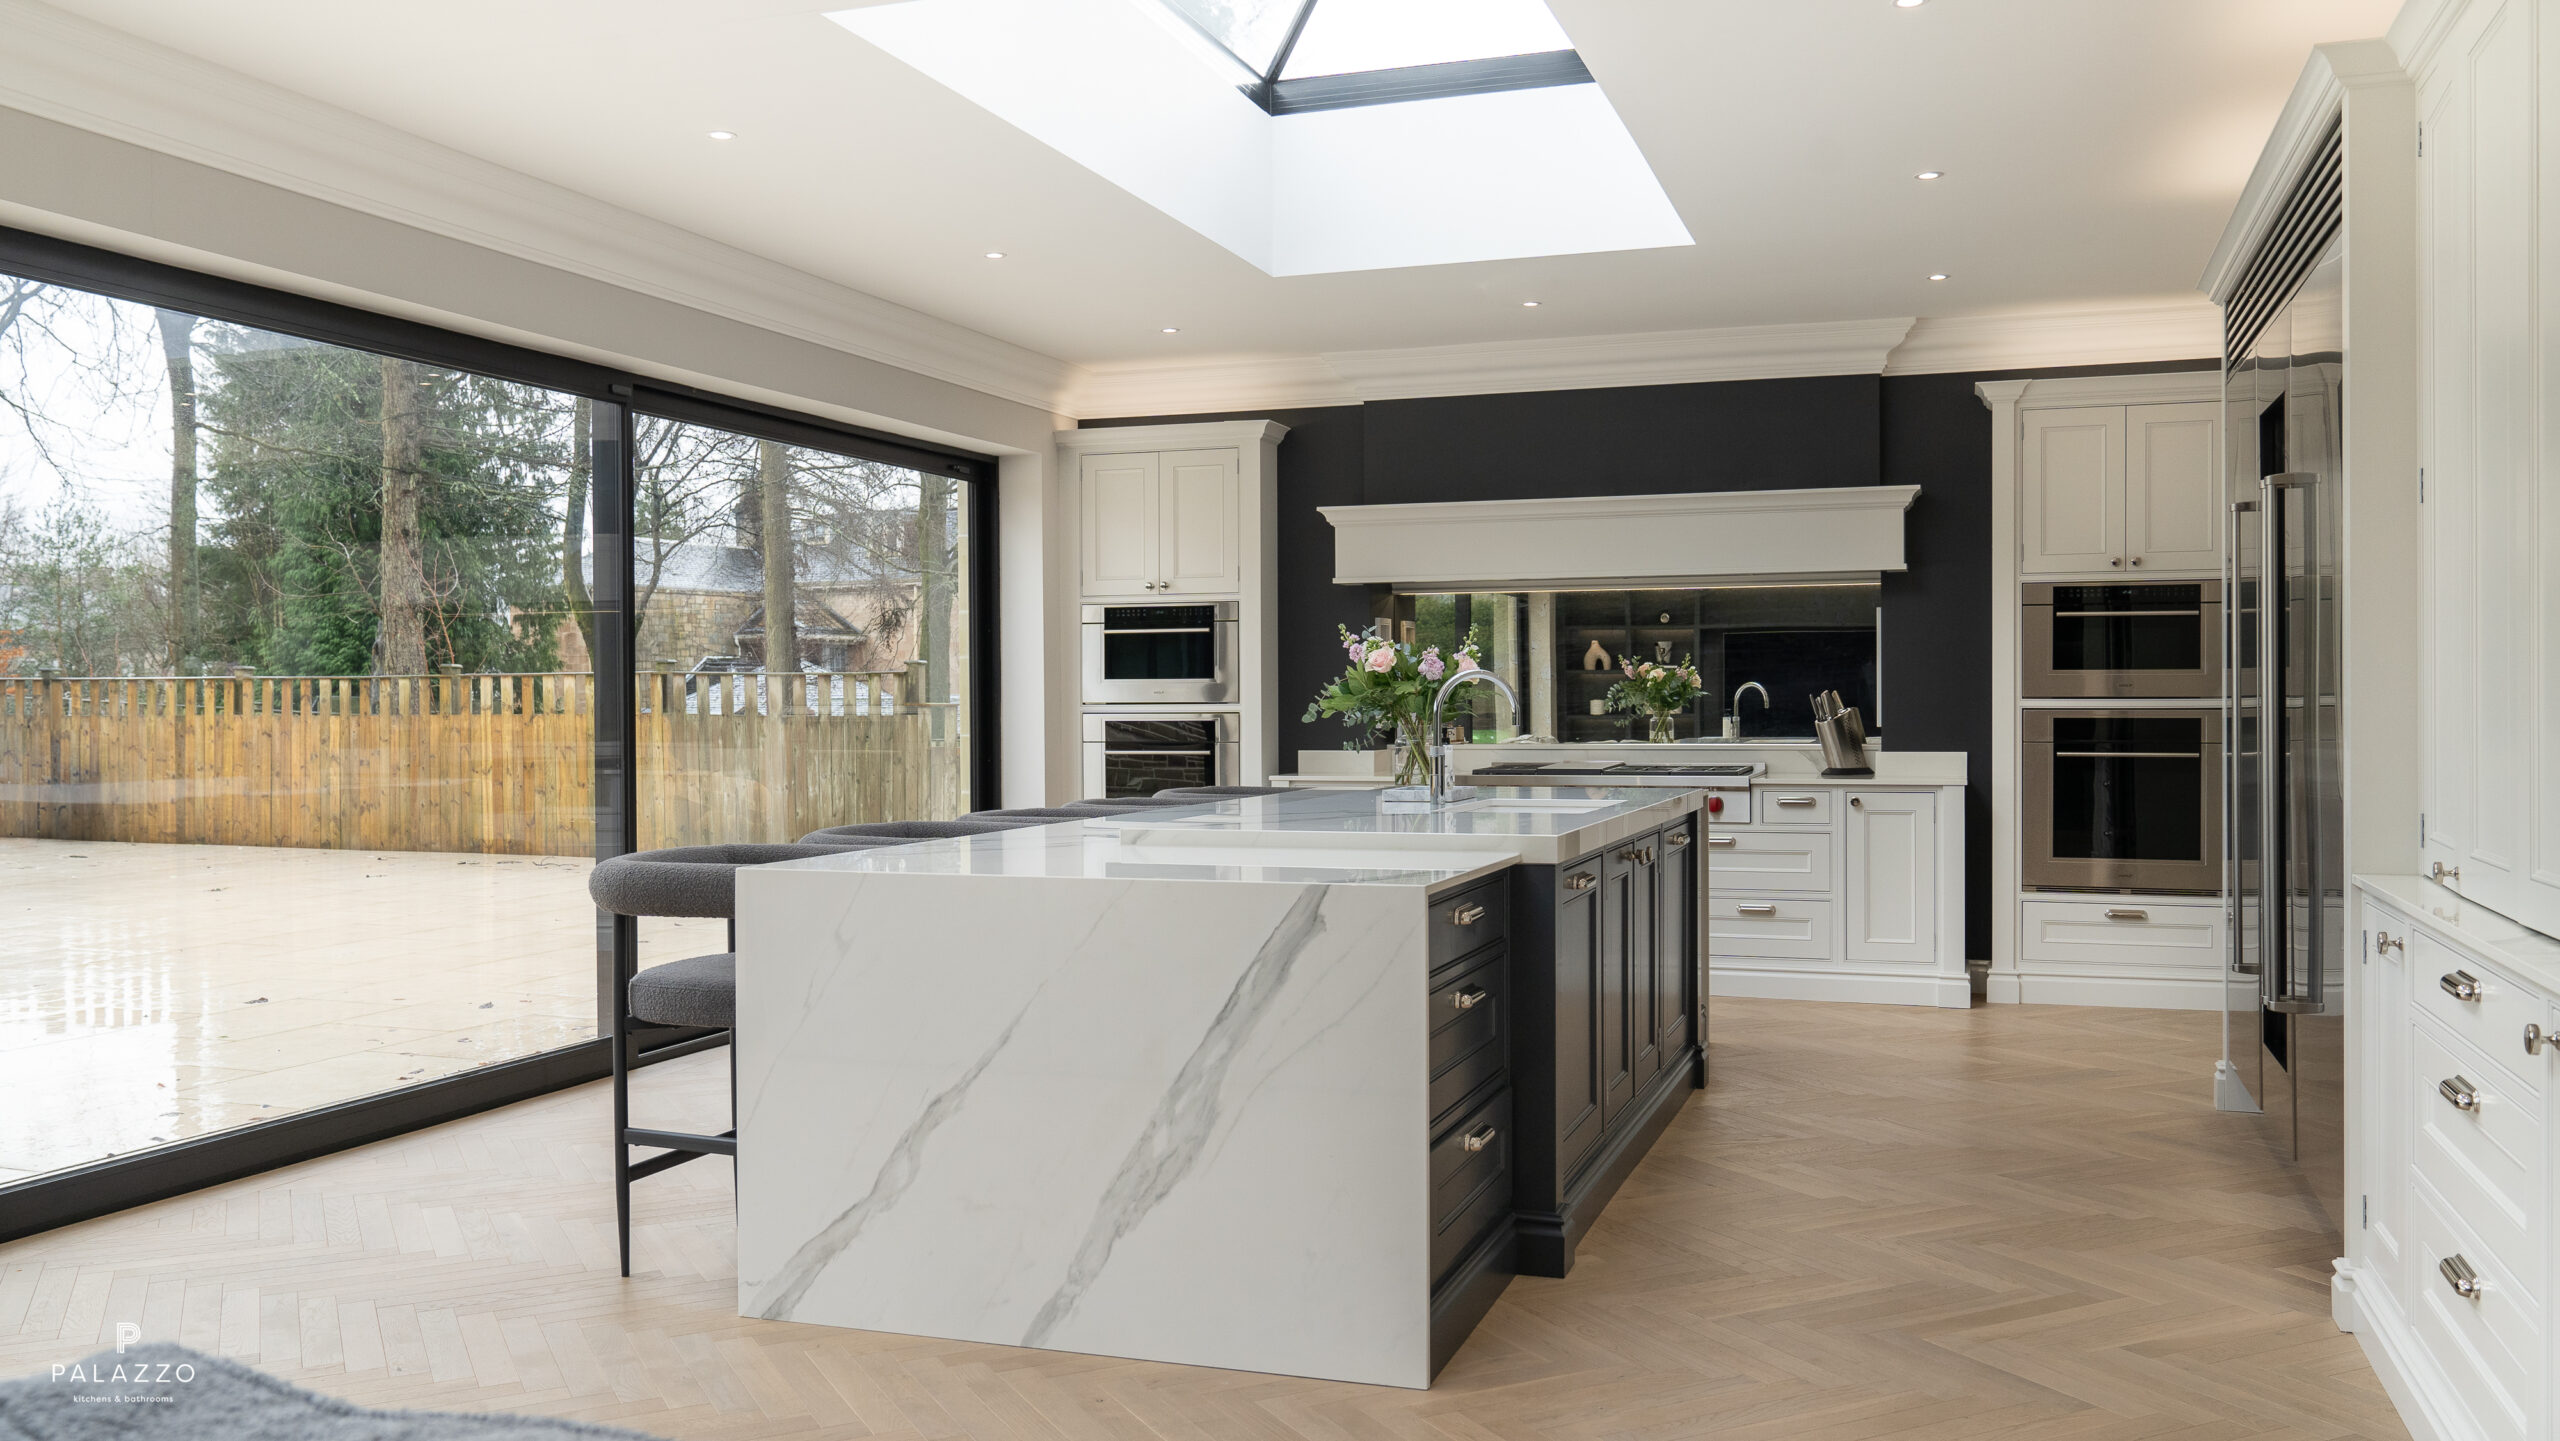 Image 23: An In-Frame Kitchen In A New Home Extension In Glasgow